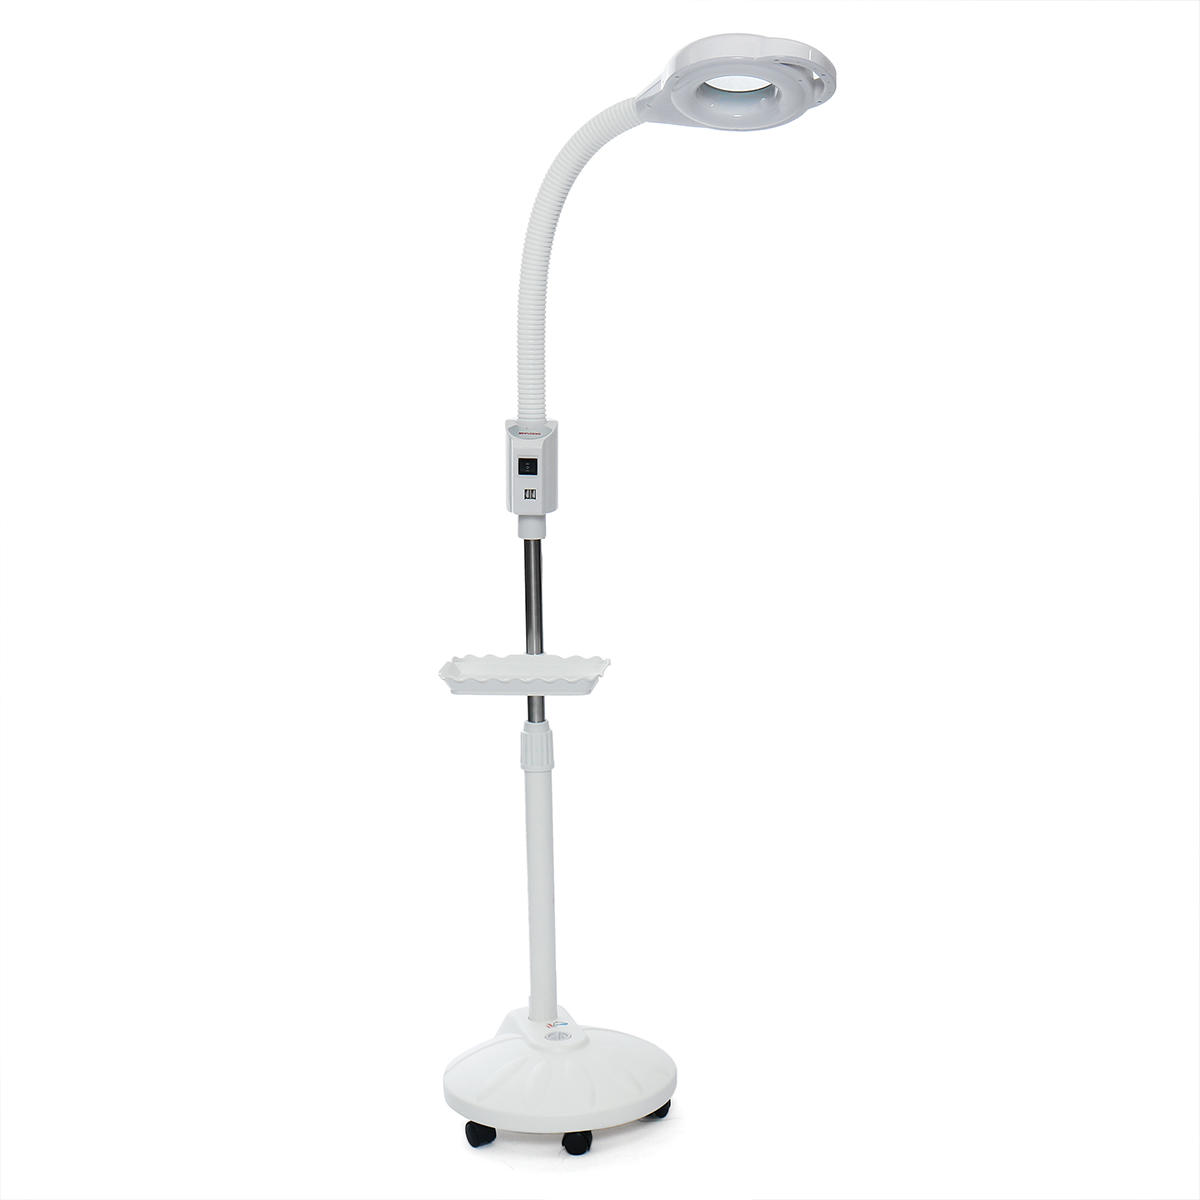 Image of 220v-240V 16X Diopter LED Magnifying Beauty Light Cold/Warm Floor Stand LampWork Light For Beauty Salon Nail